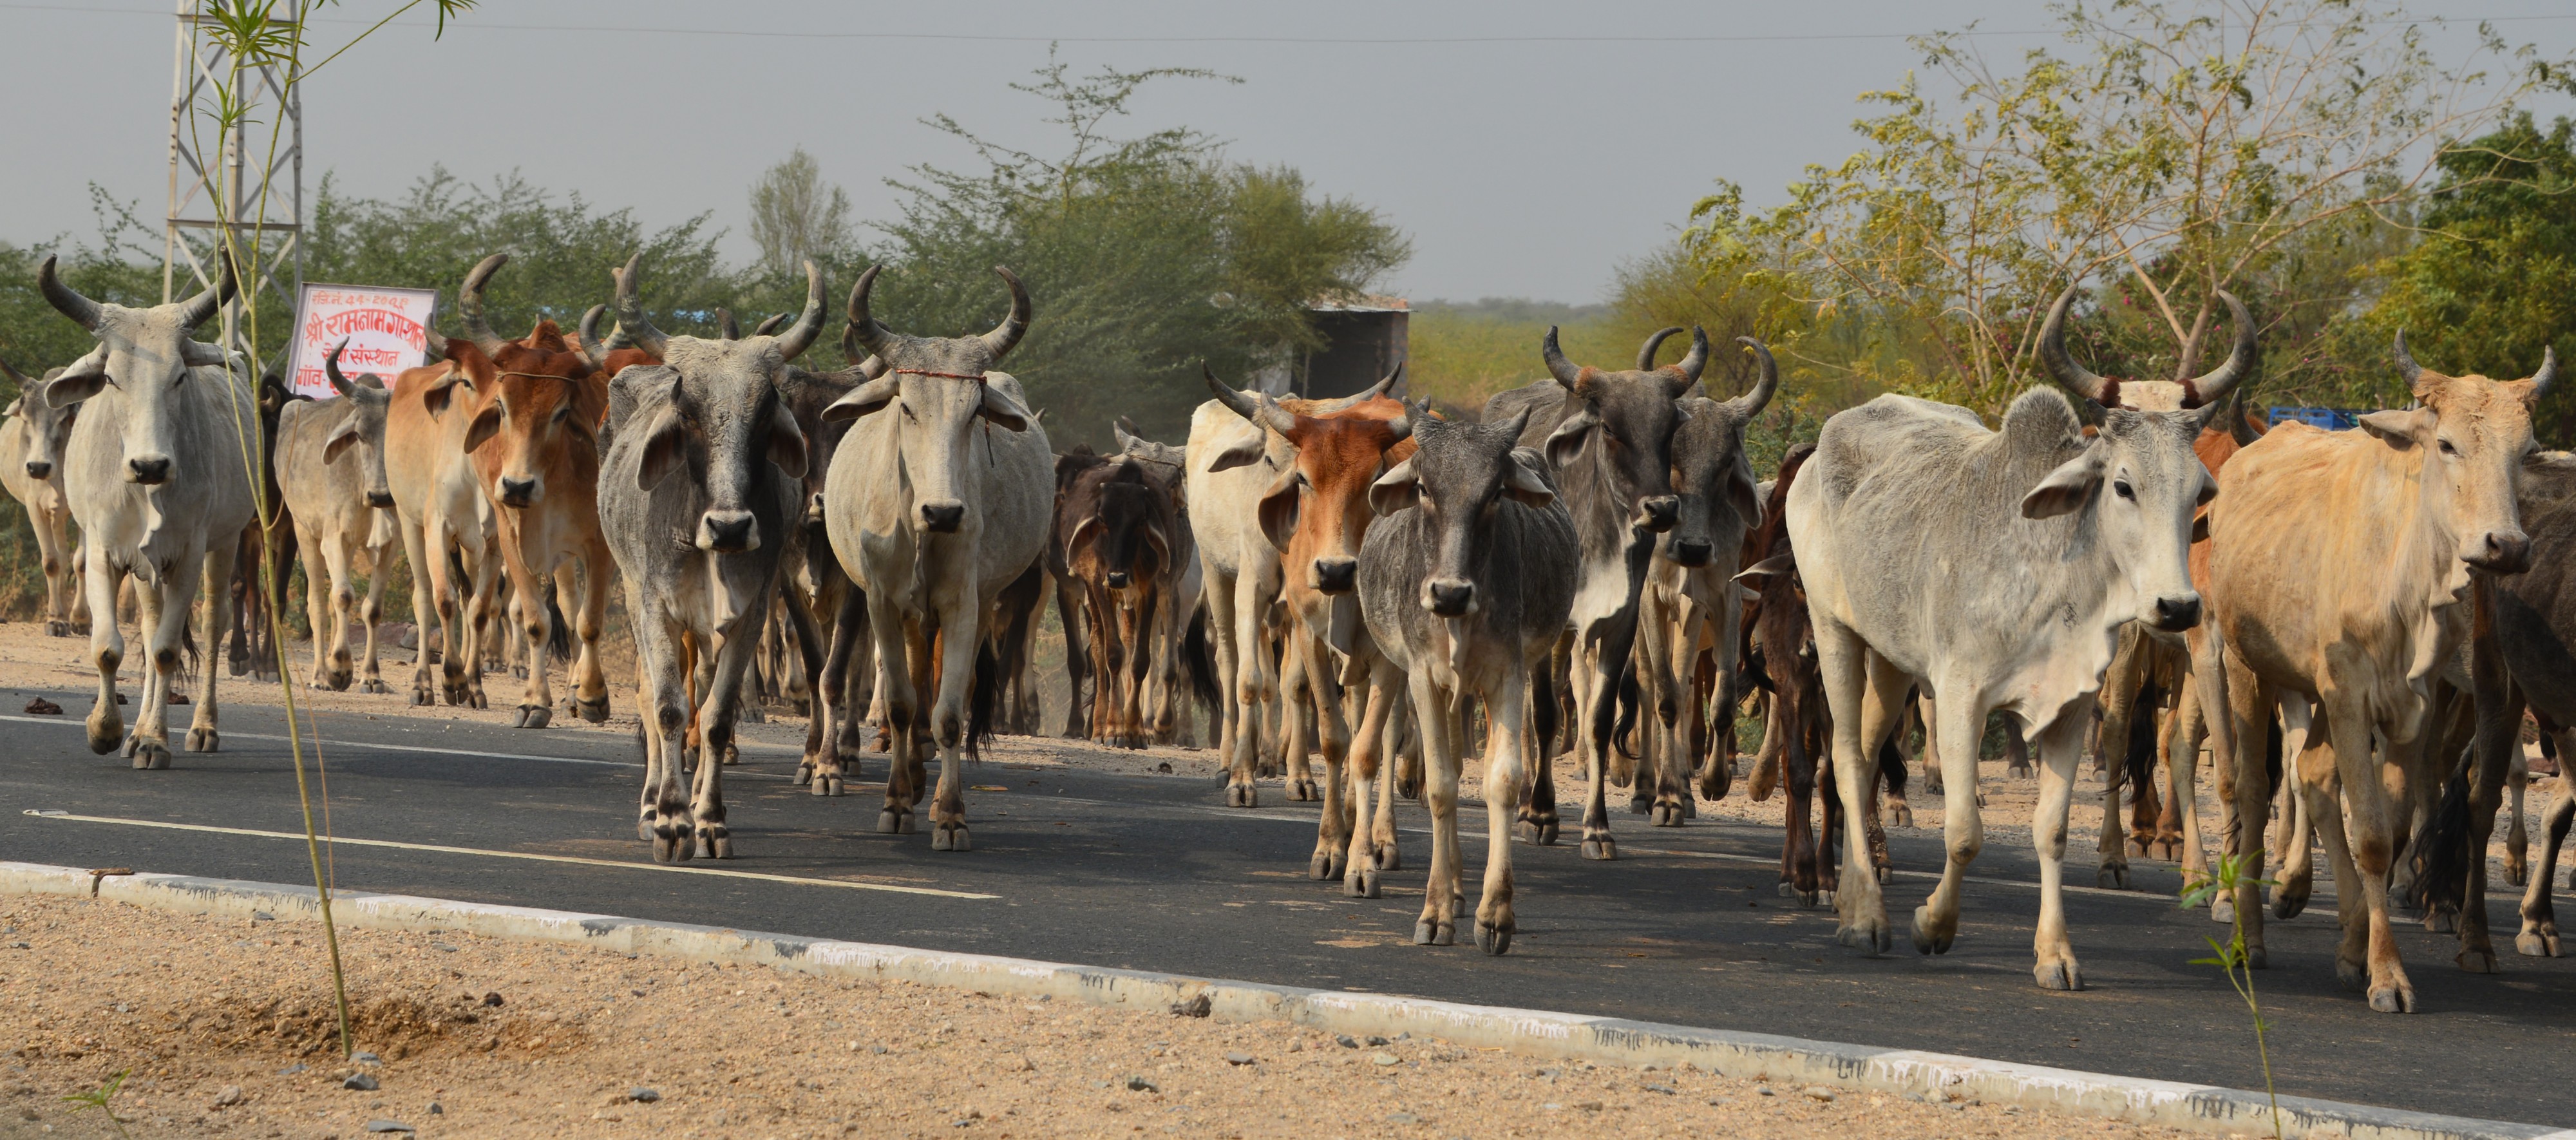 Cattle in India